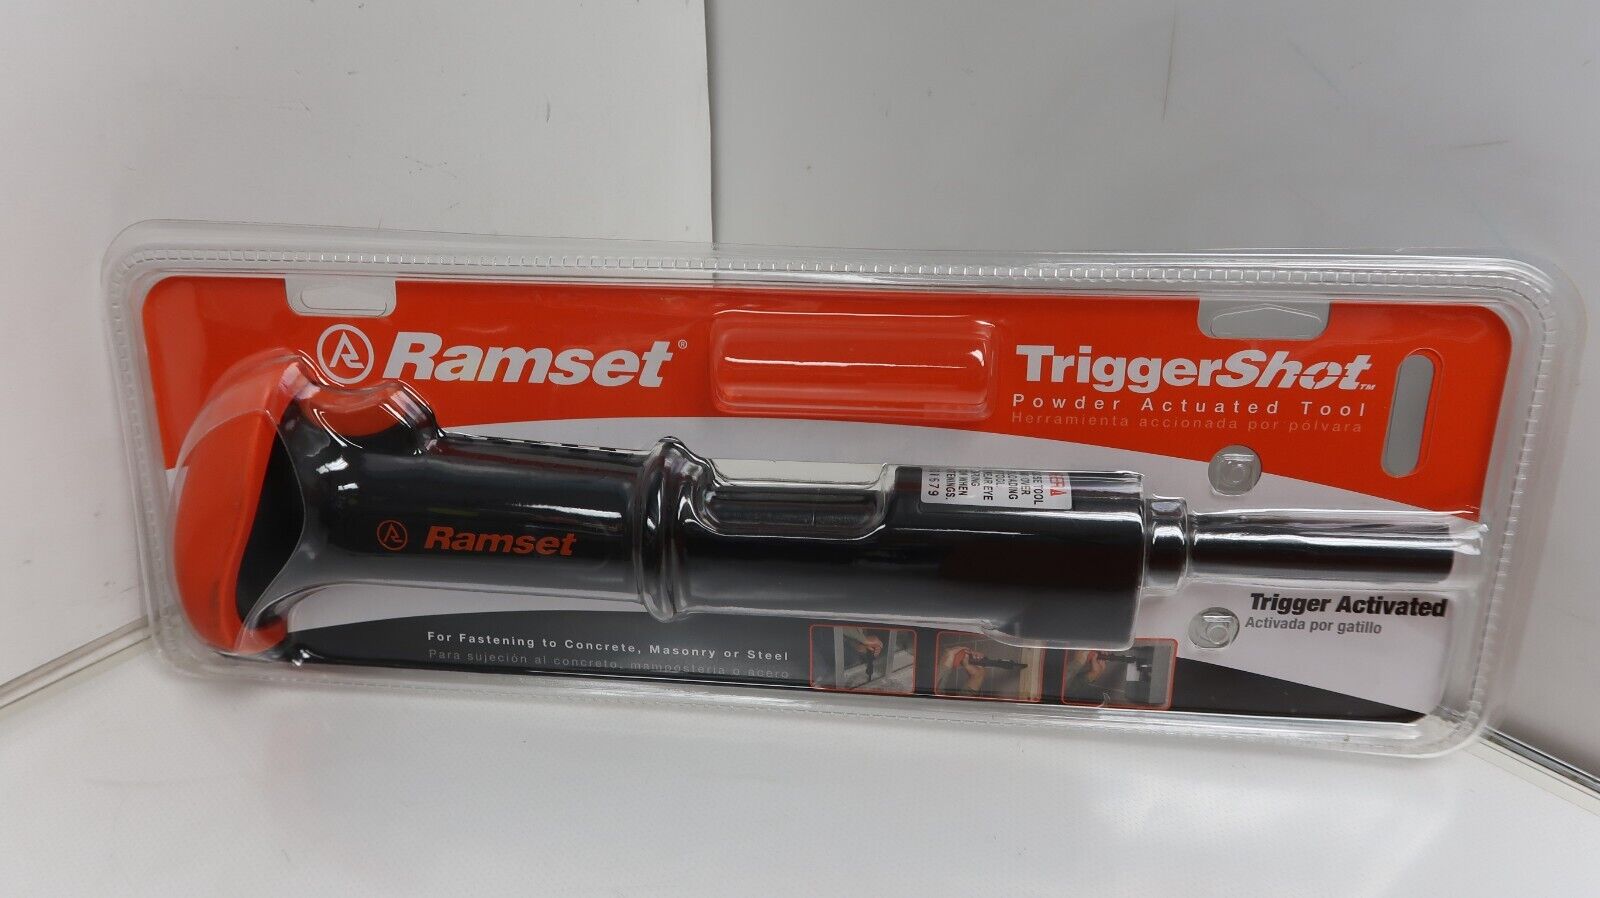 Ramset Trigger Shot Powder Actuated Tool Device